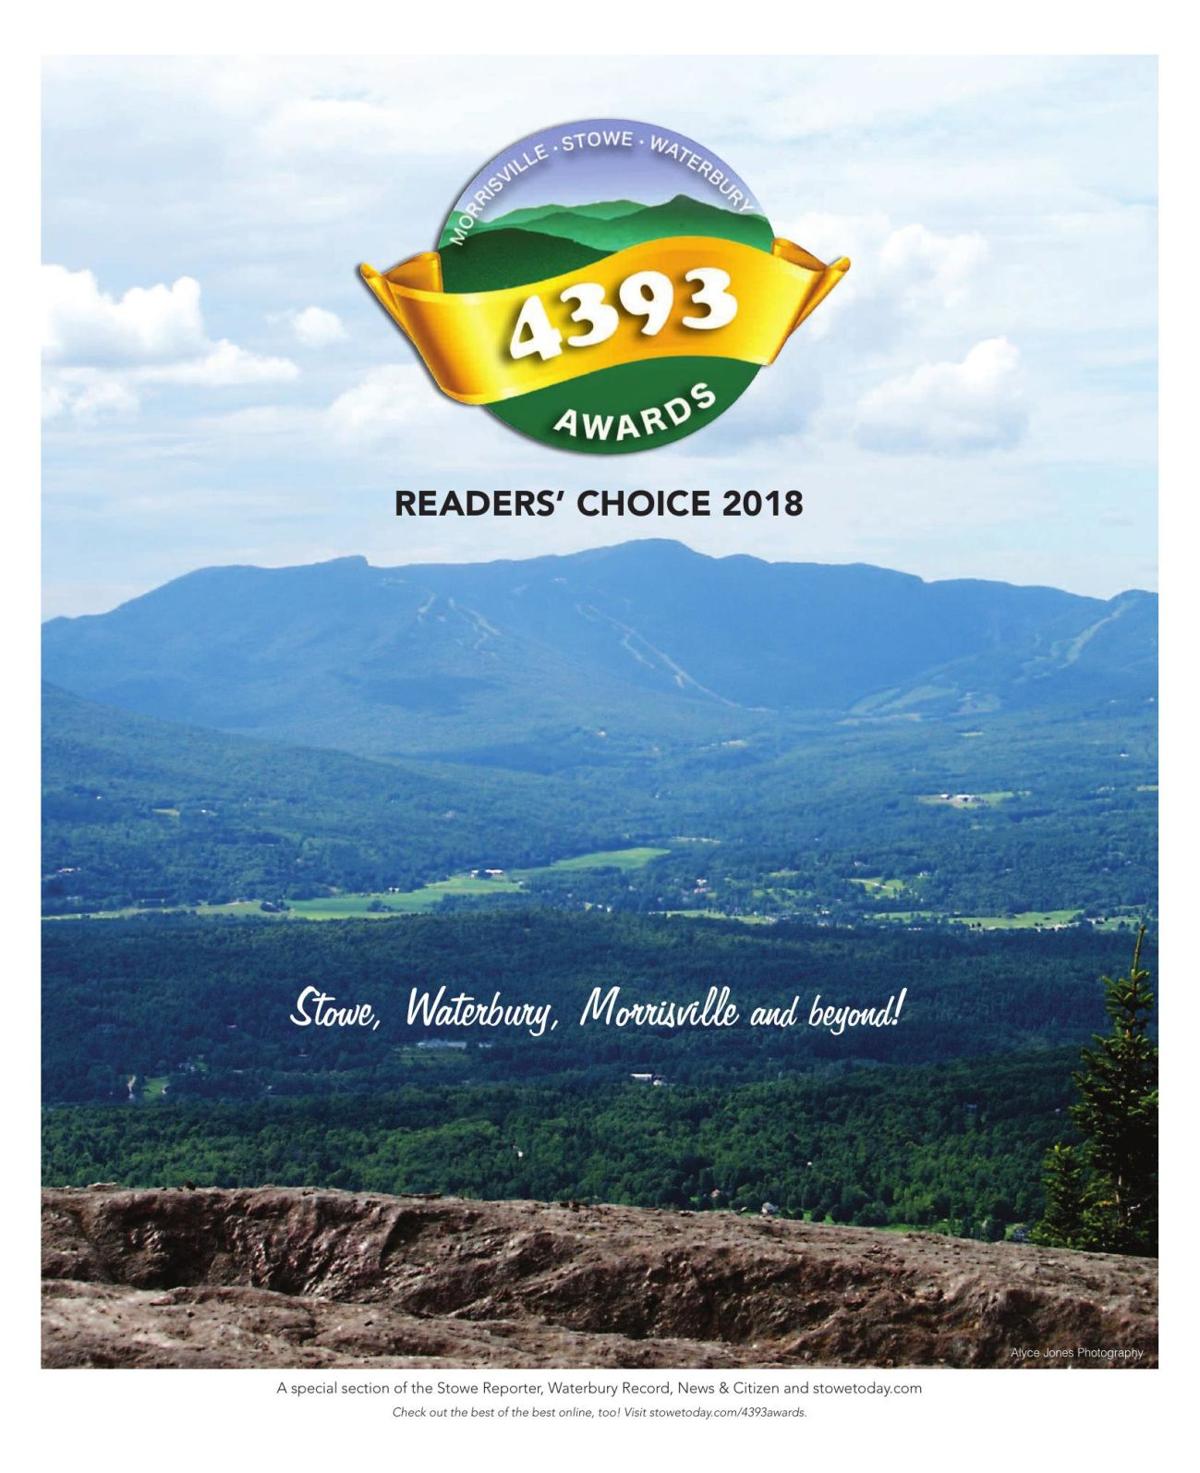 Welcome to the 4393 Awards Readers’ Choice 2018